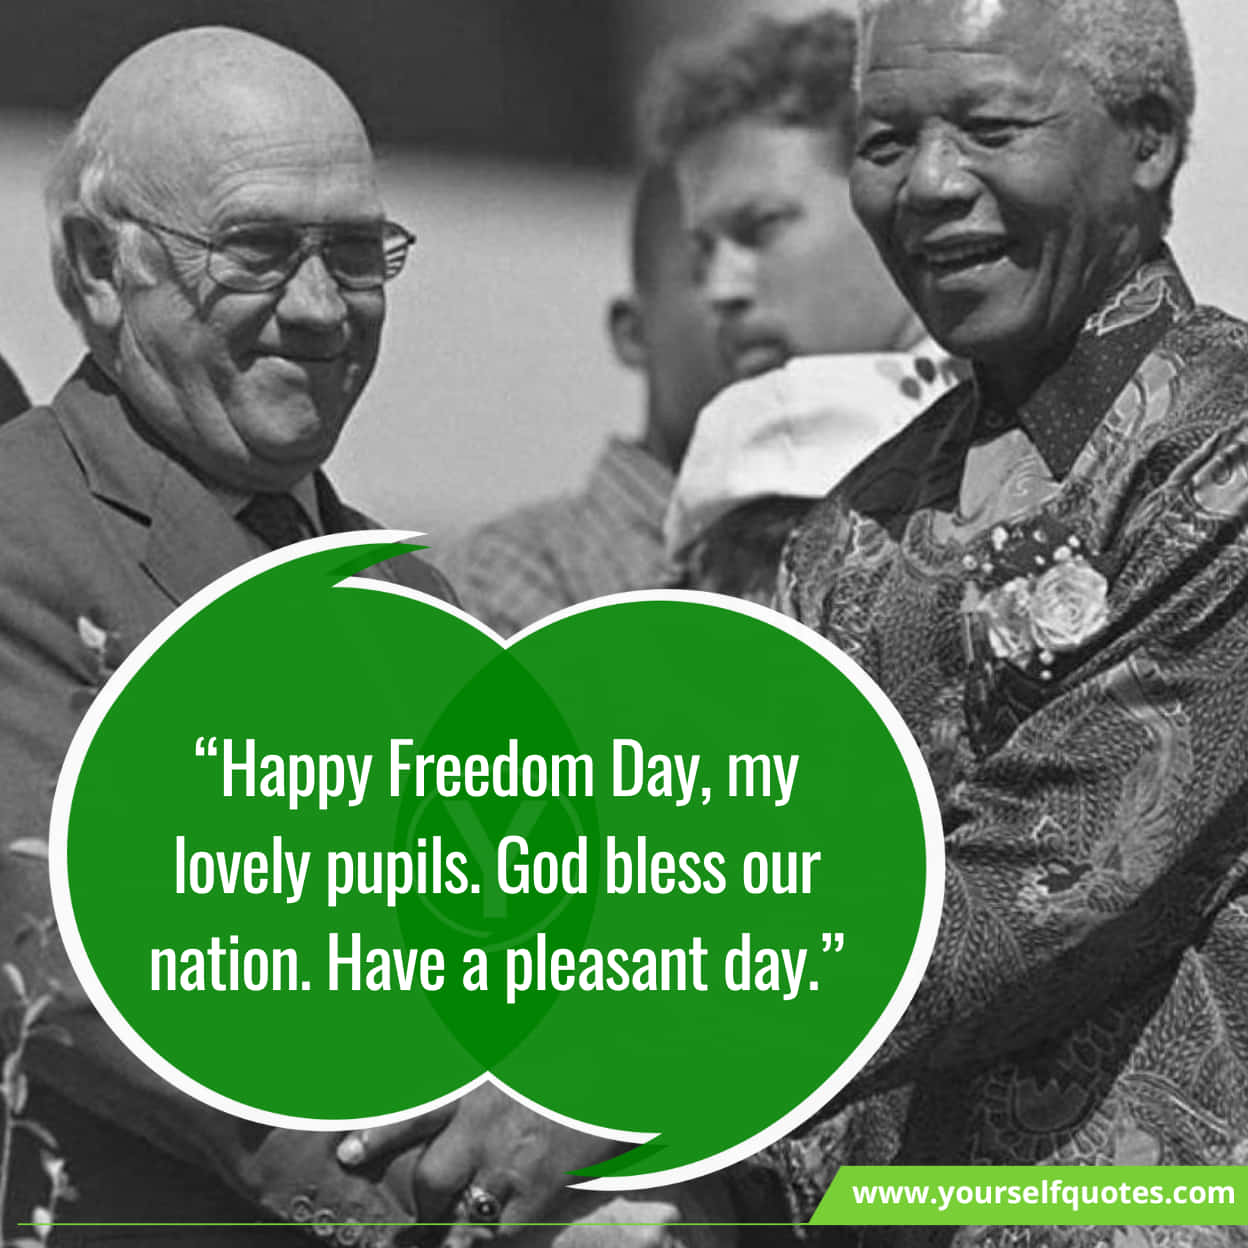 Happy Freedom Day Quotes & Messages